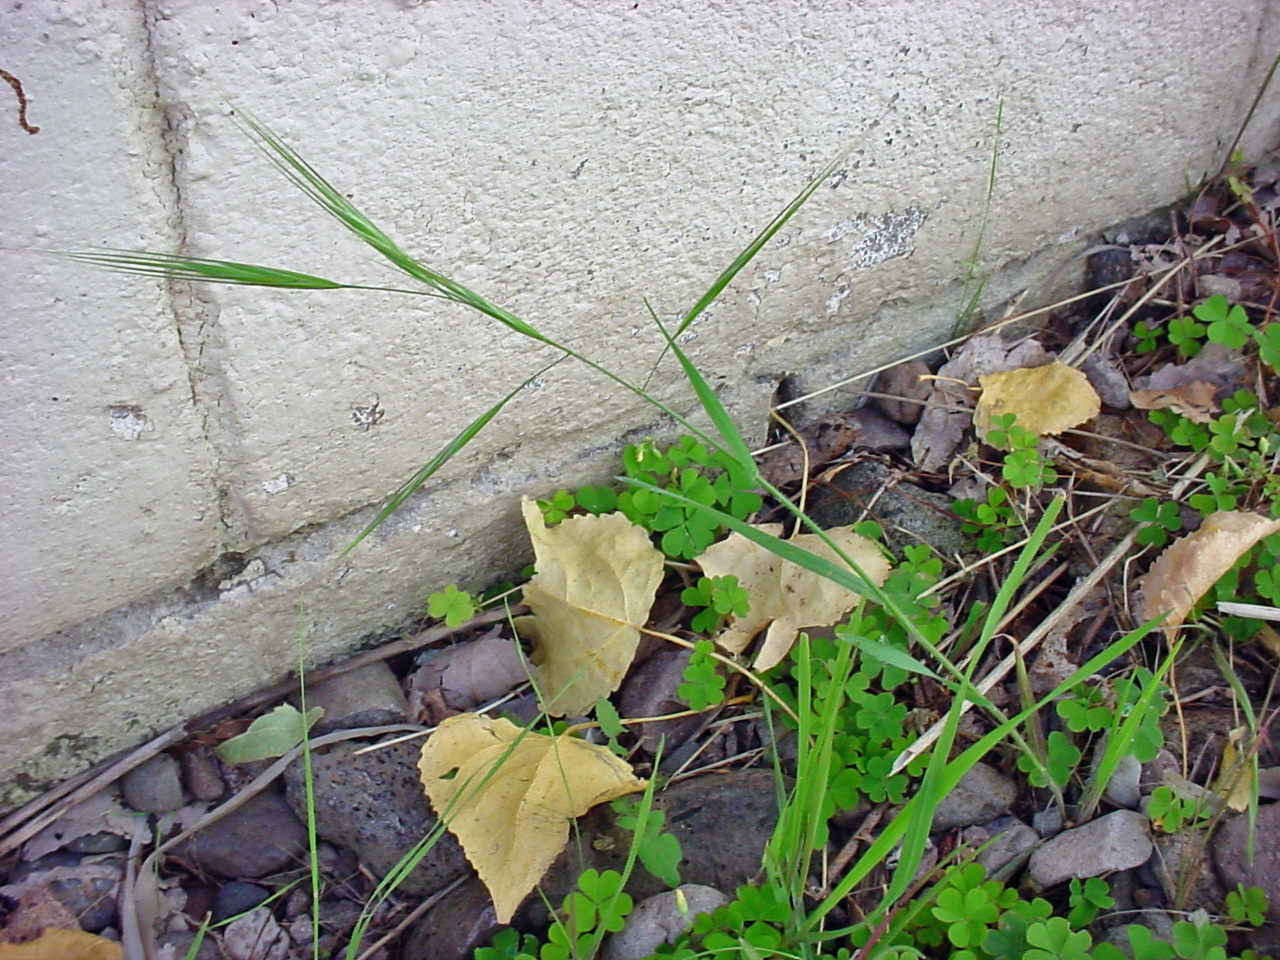 Growth habit: slender stem with seedhead and awns